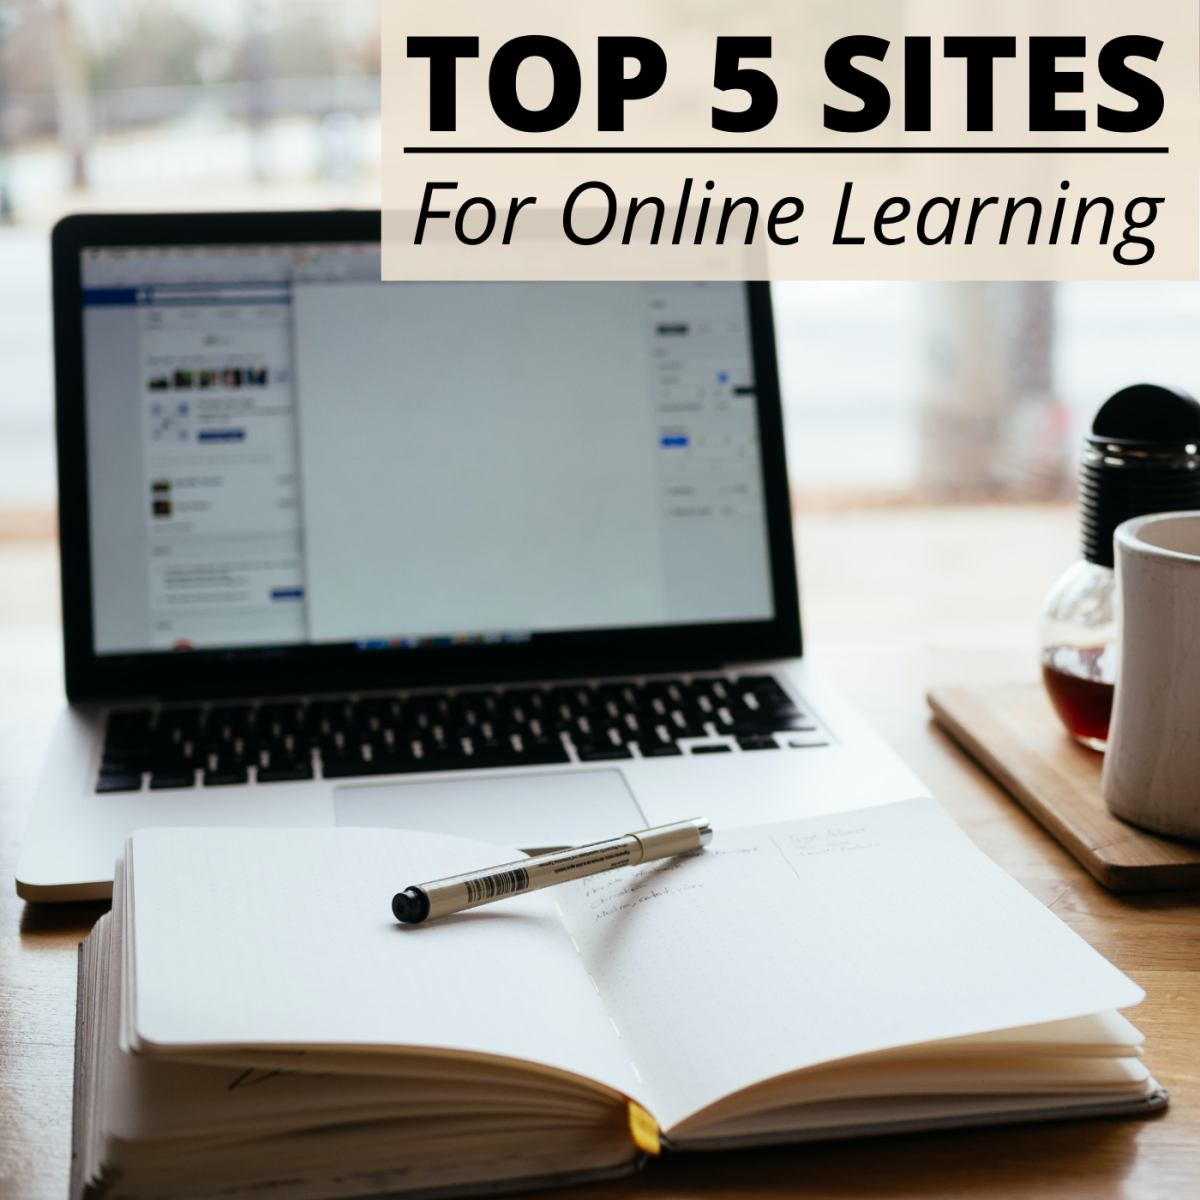 Learning online is a great way to make your education fit your schedule and budget. 